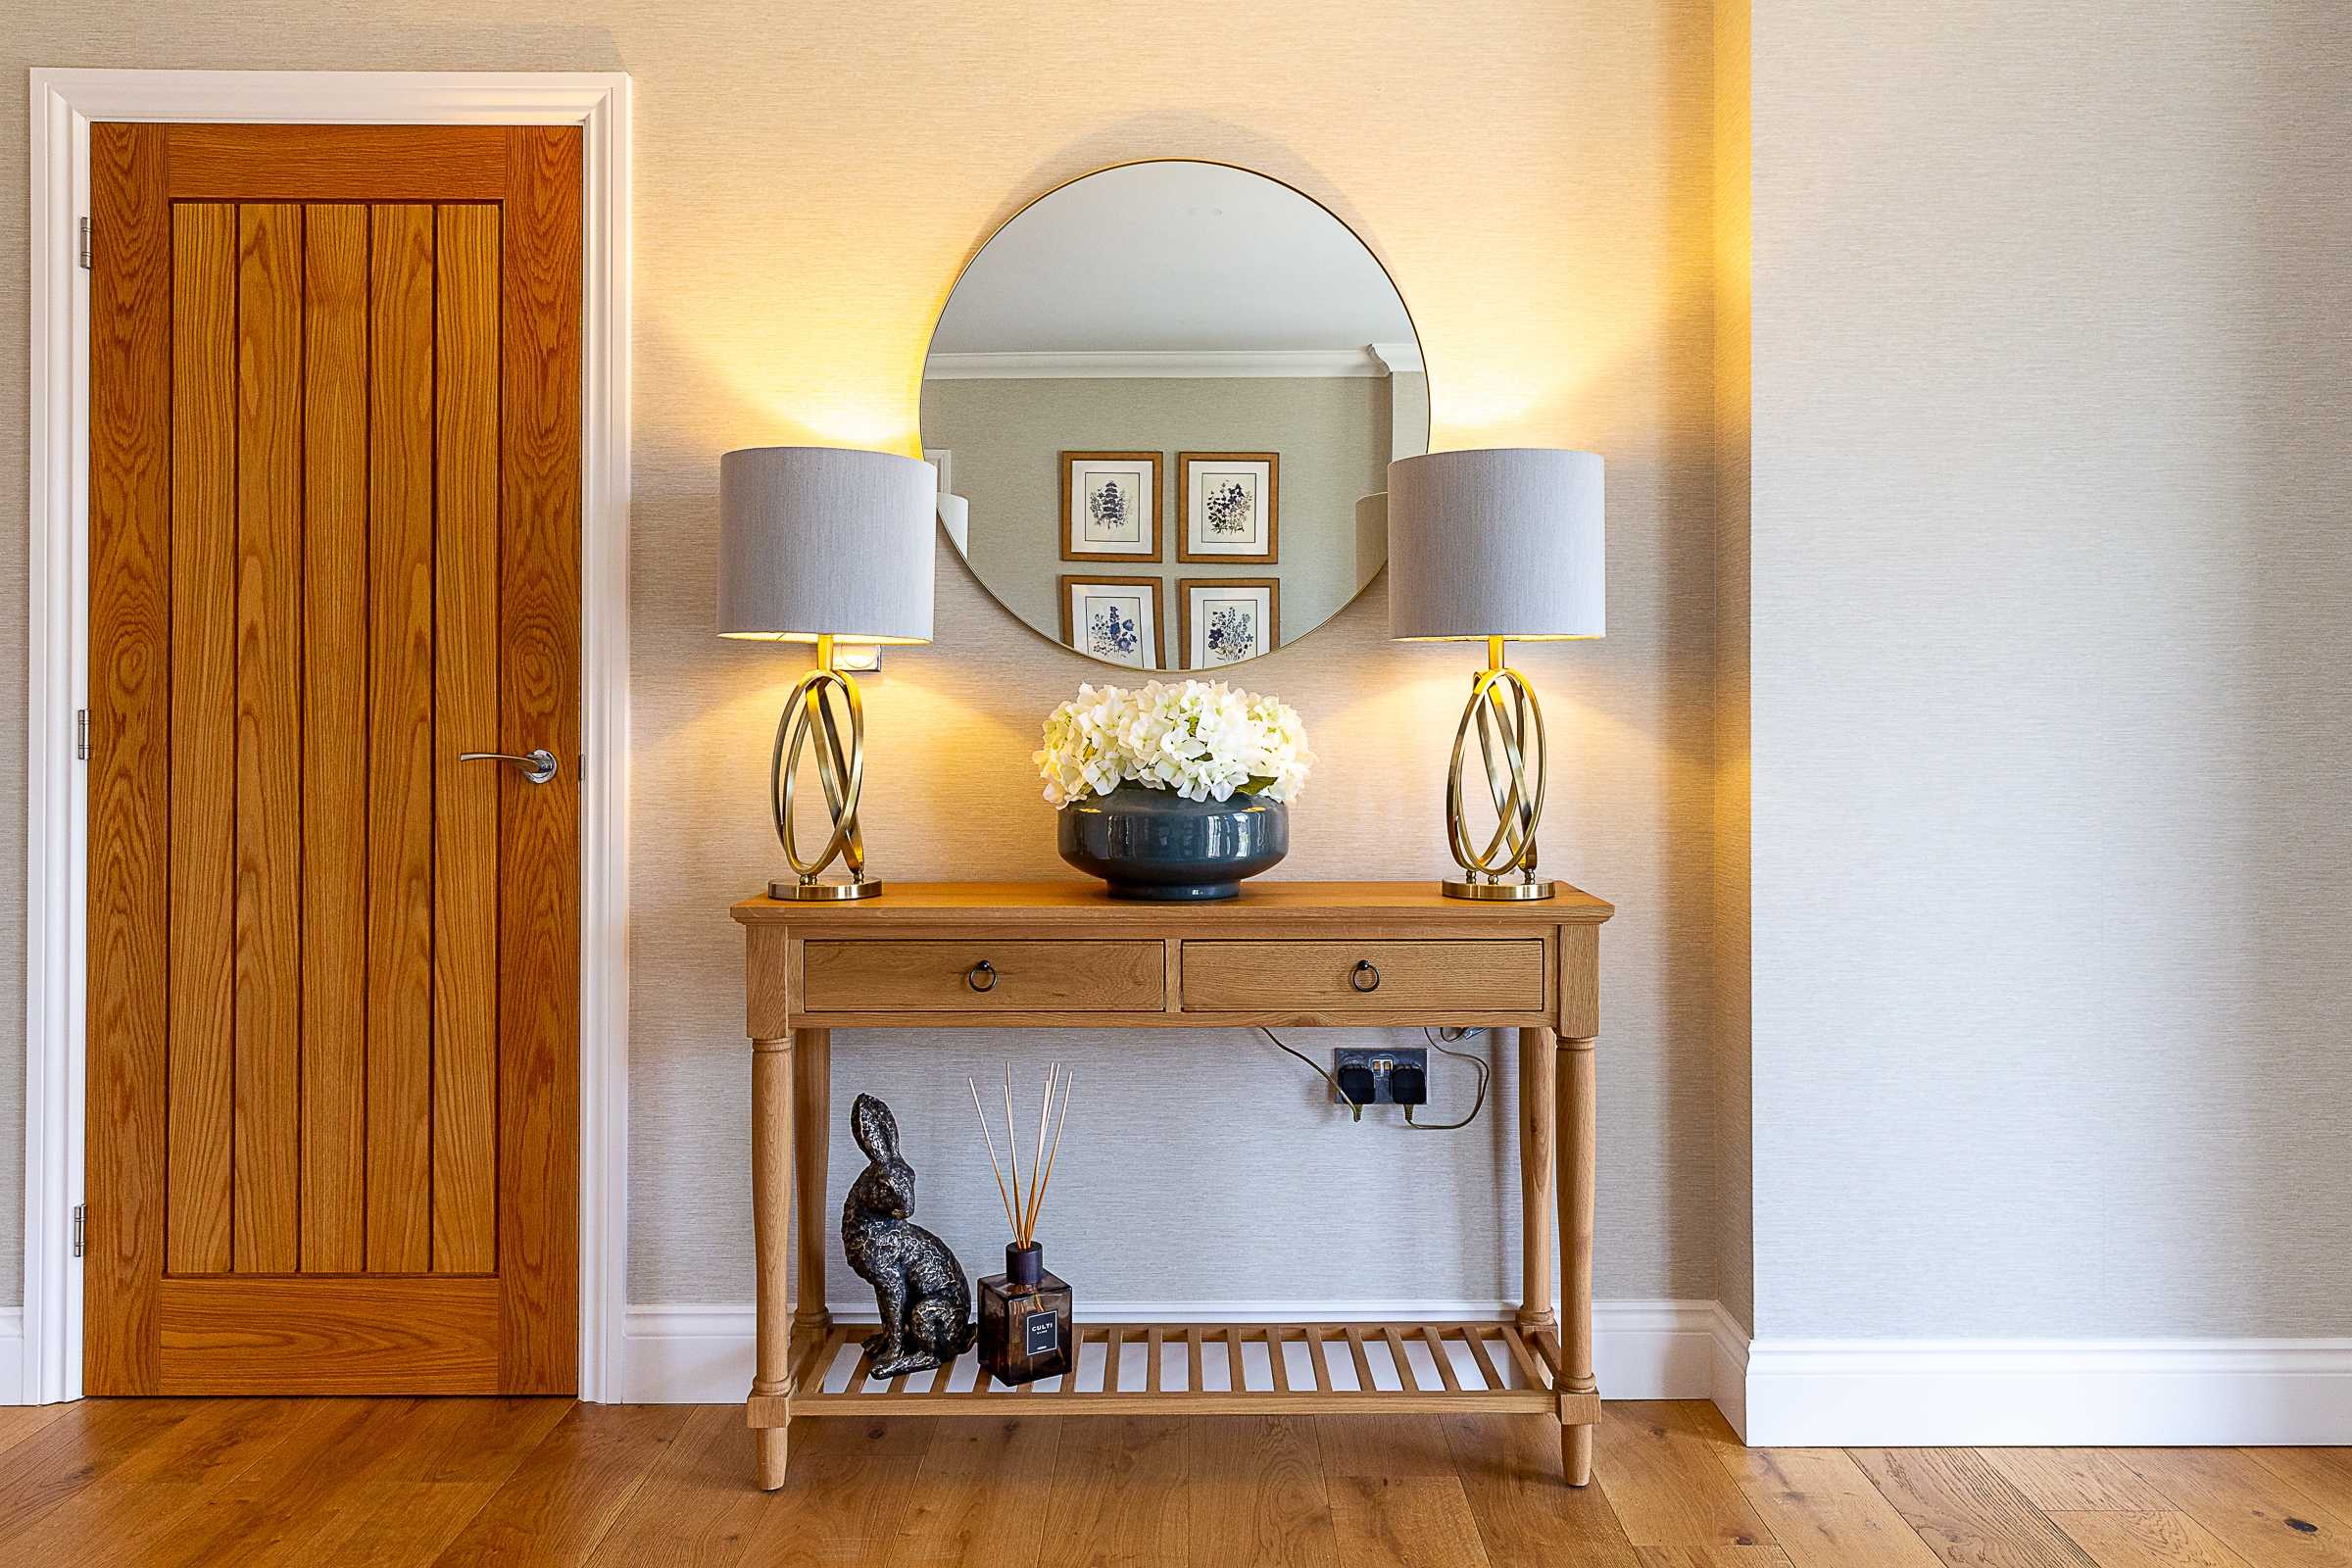 Hallway console with lamps